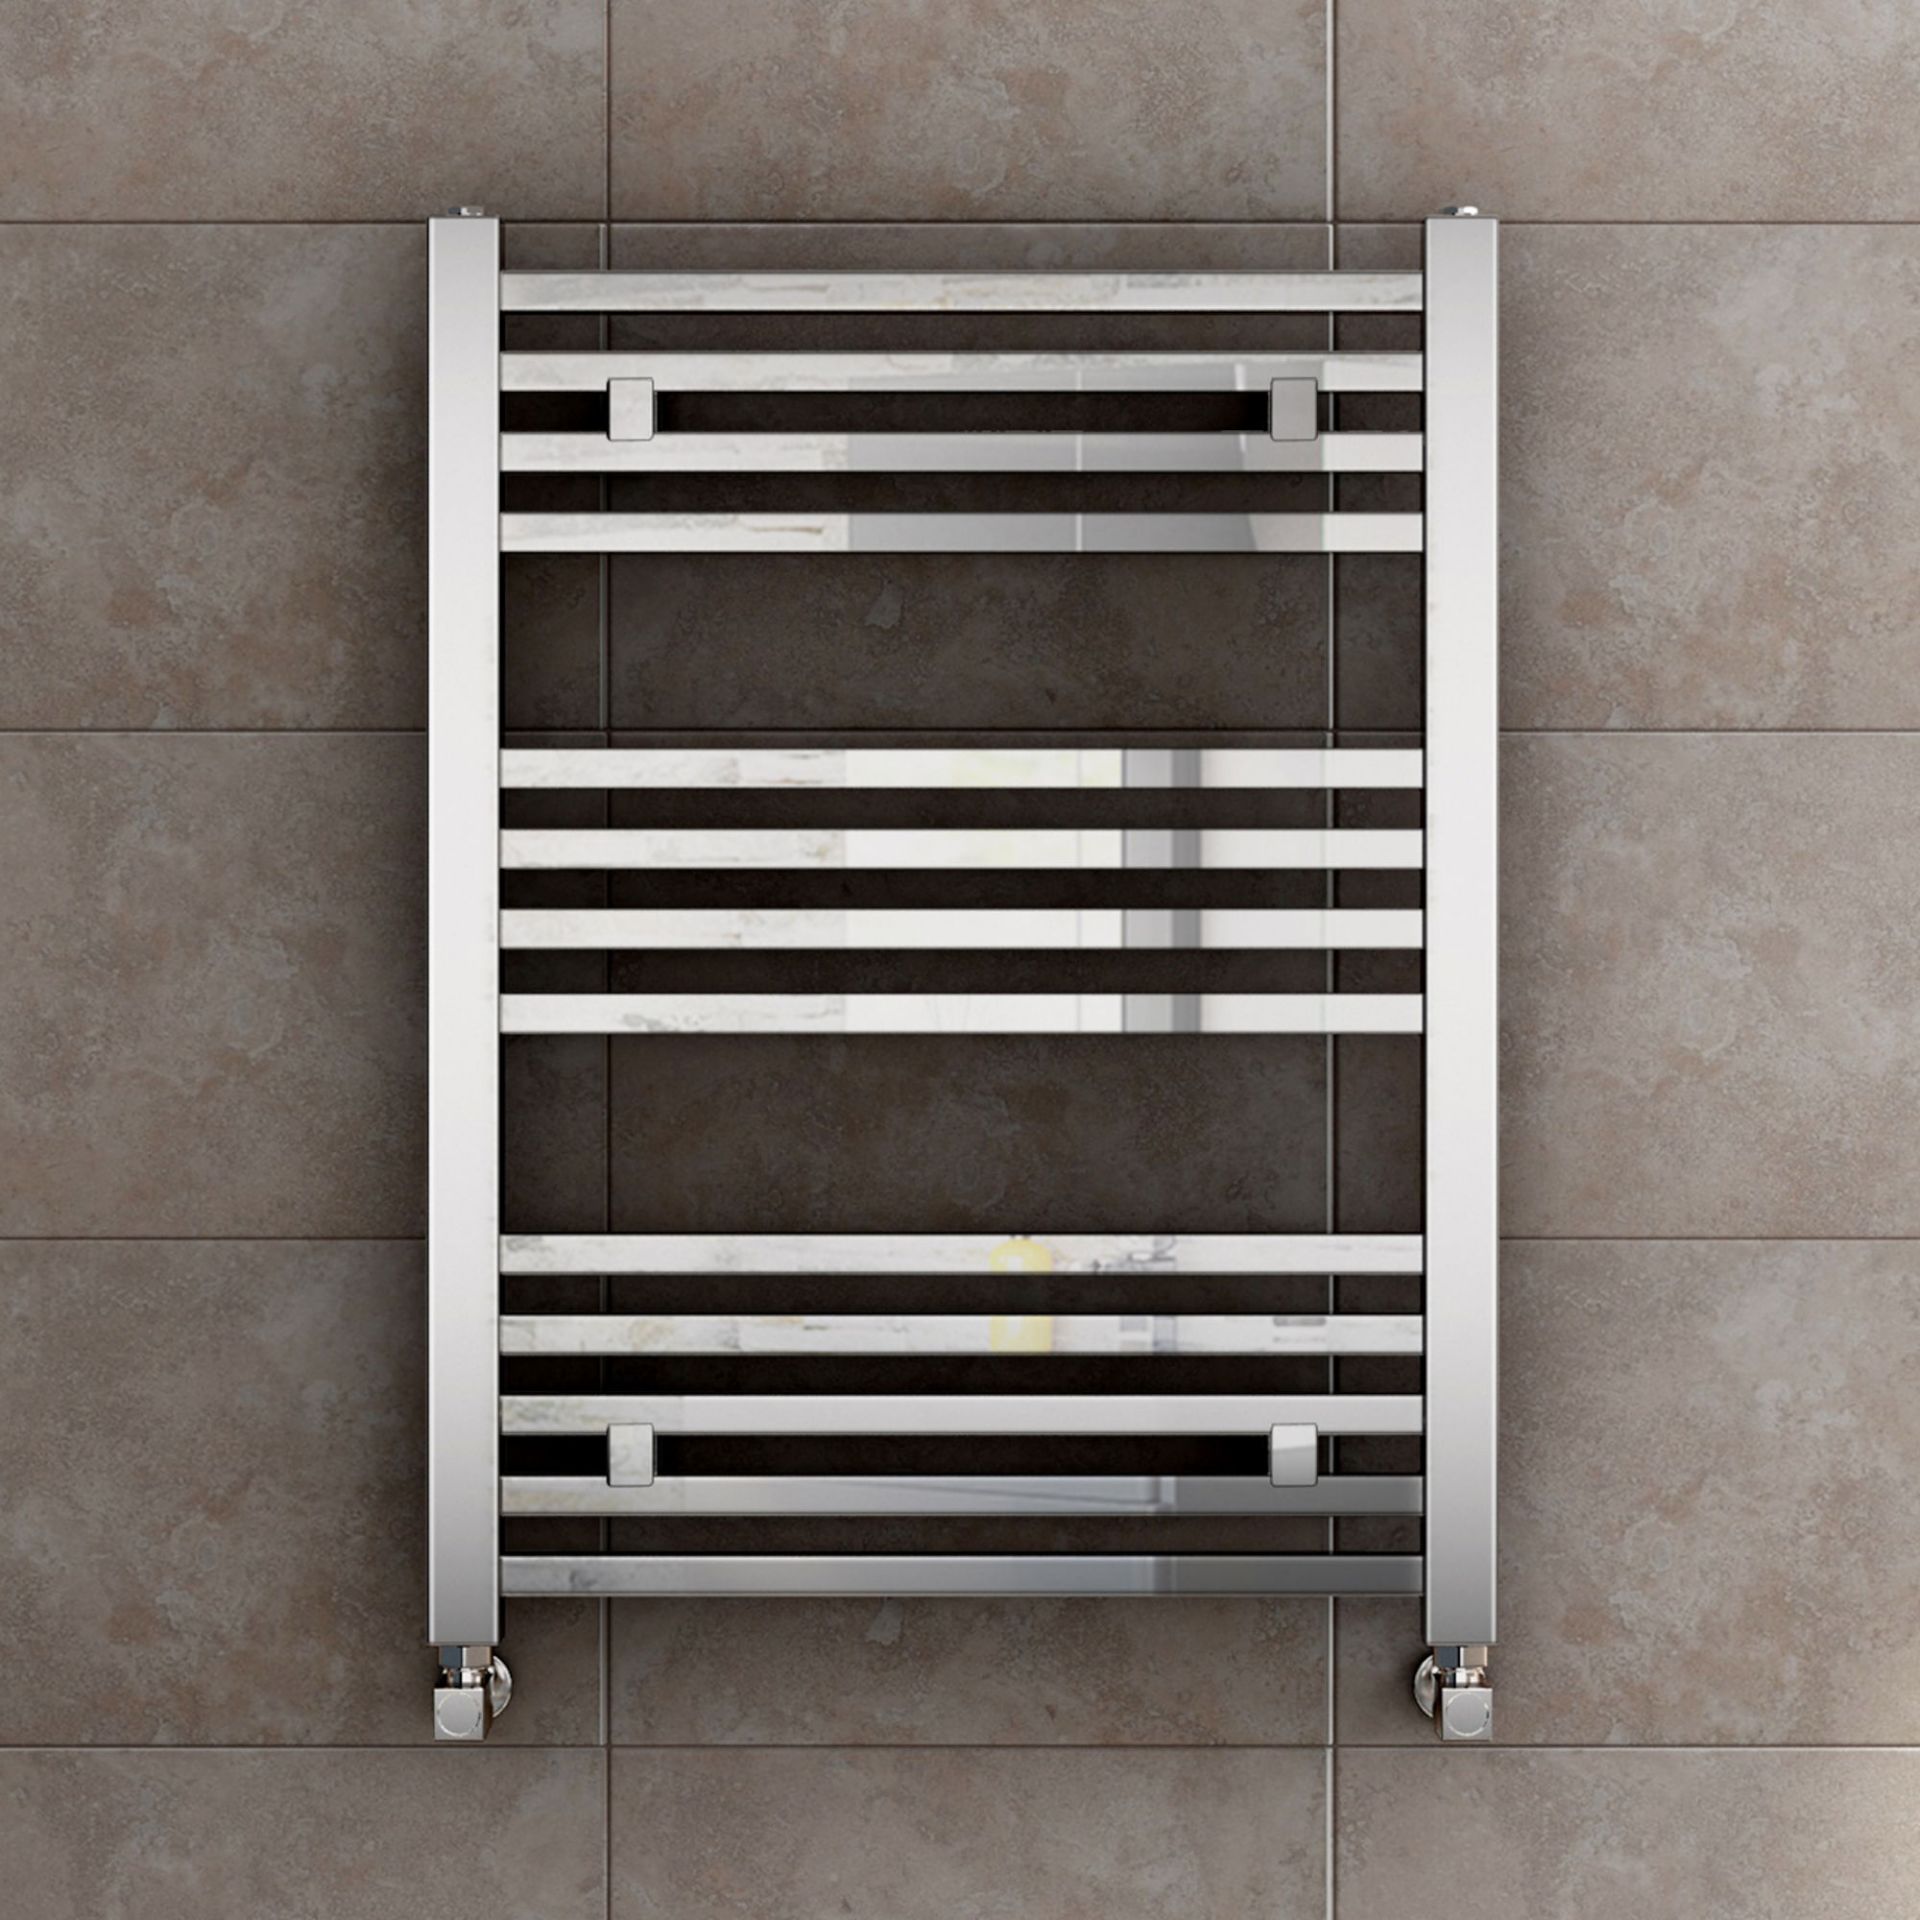 (MW108) 800x600mm Chrome Square Rail Ladder Towel Radiator. Made from low carbon steel with a high